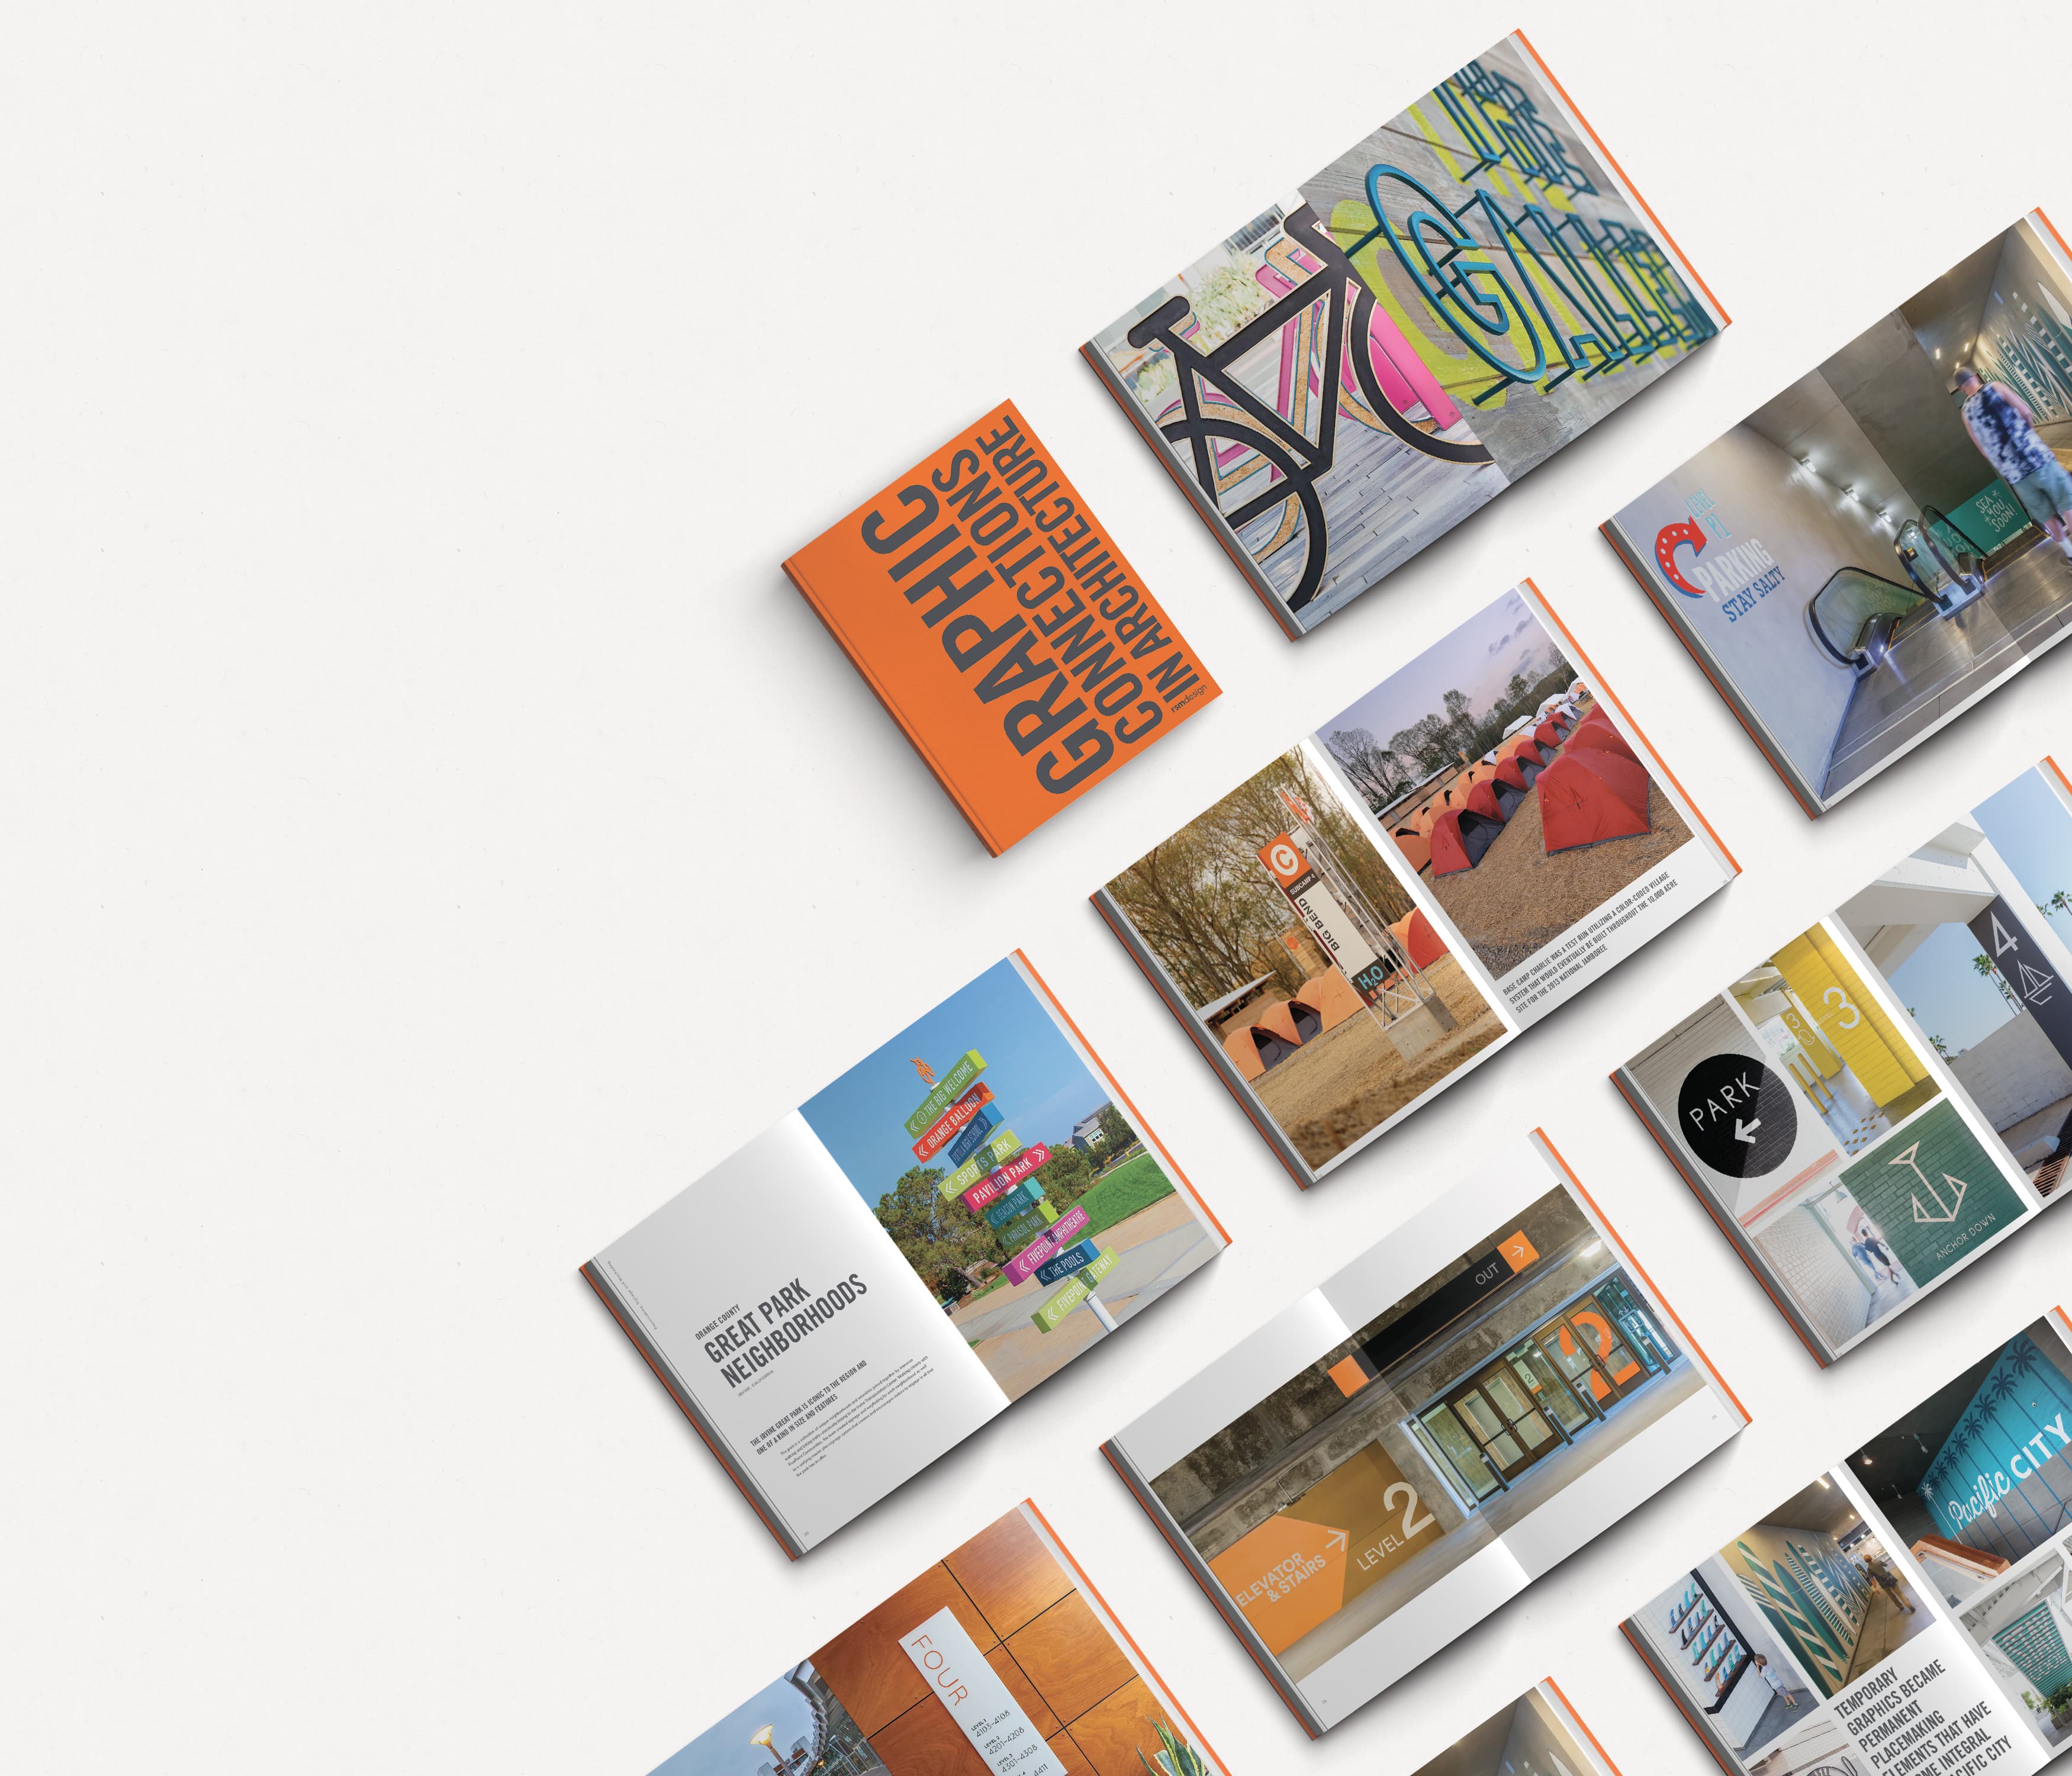 An arrangement of RSM Design's newest book, Graphic Connections in Architecture, displays several pages from the book.